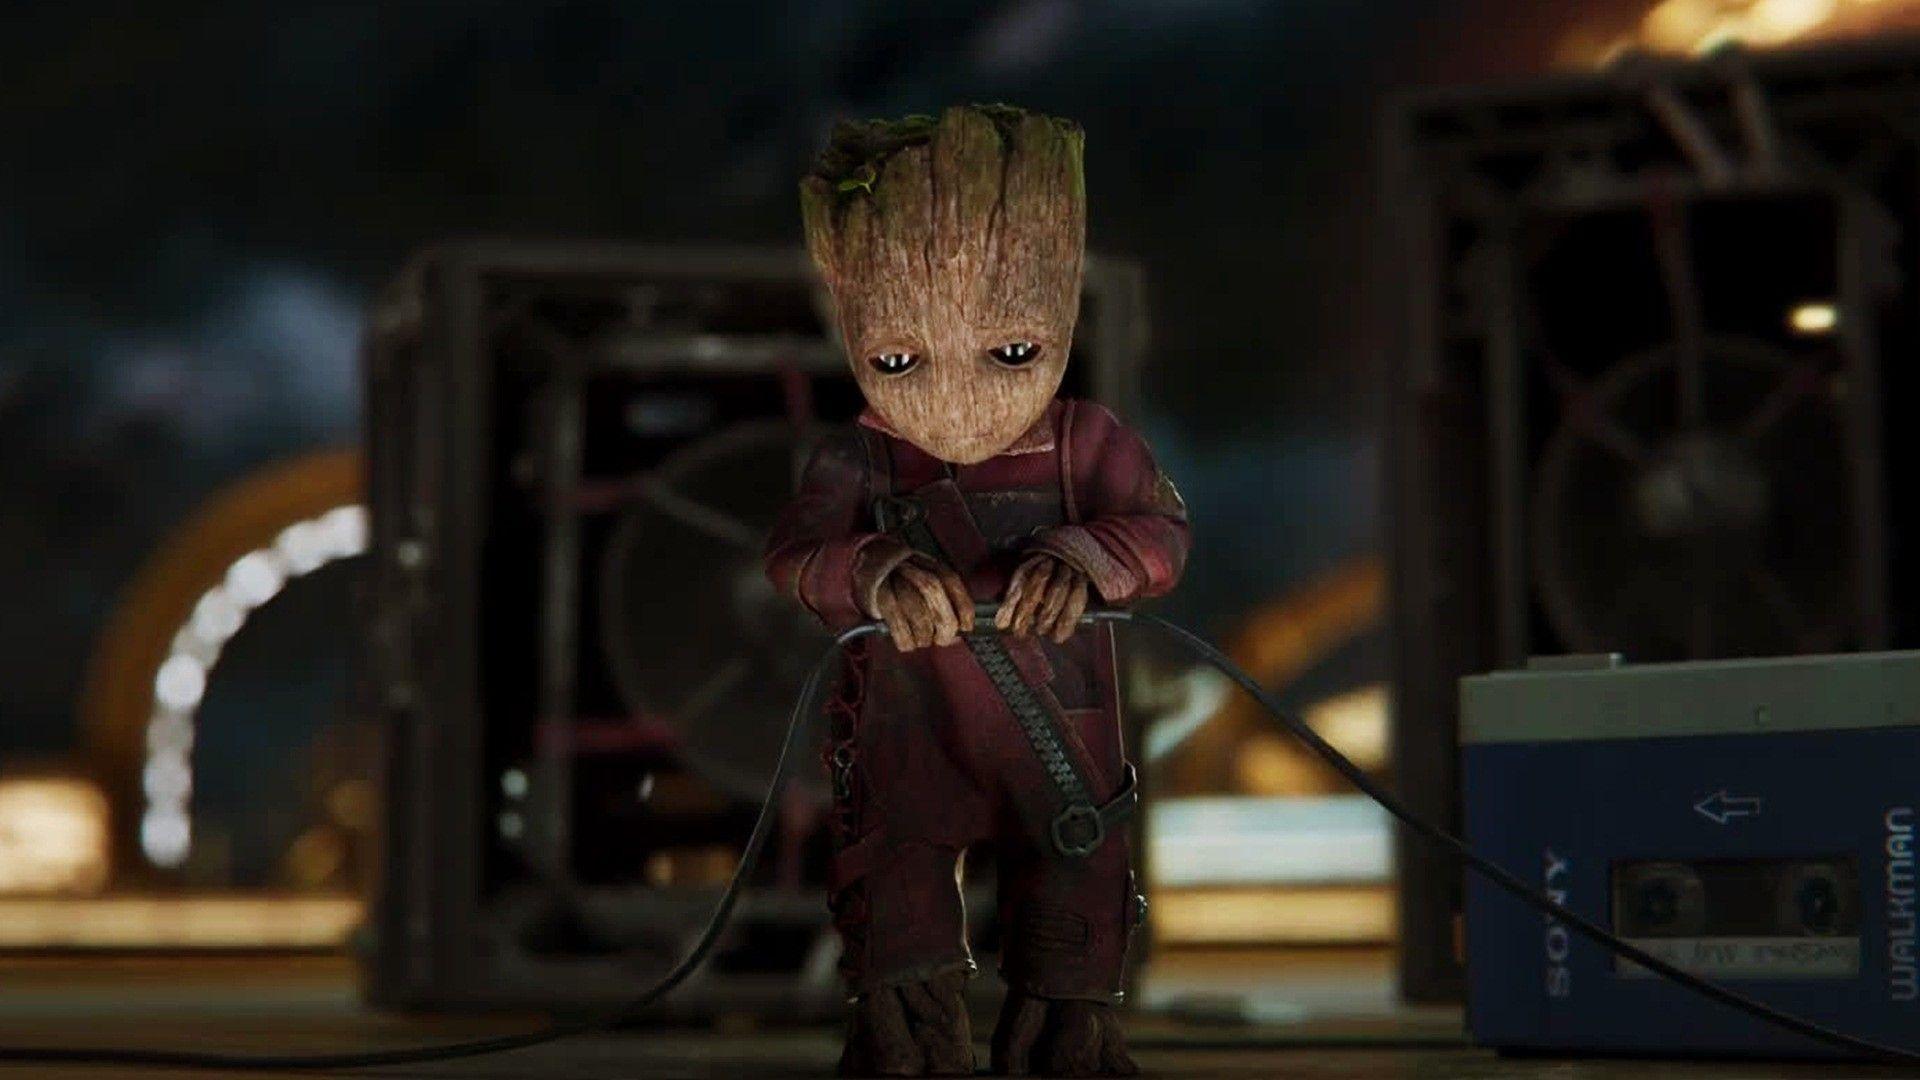 Baby Groot Wallpapers - Top Free Baby Groot Backgrounds - WallpaperAccess